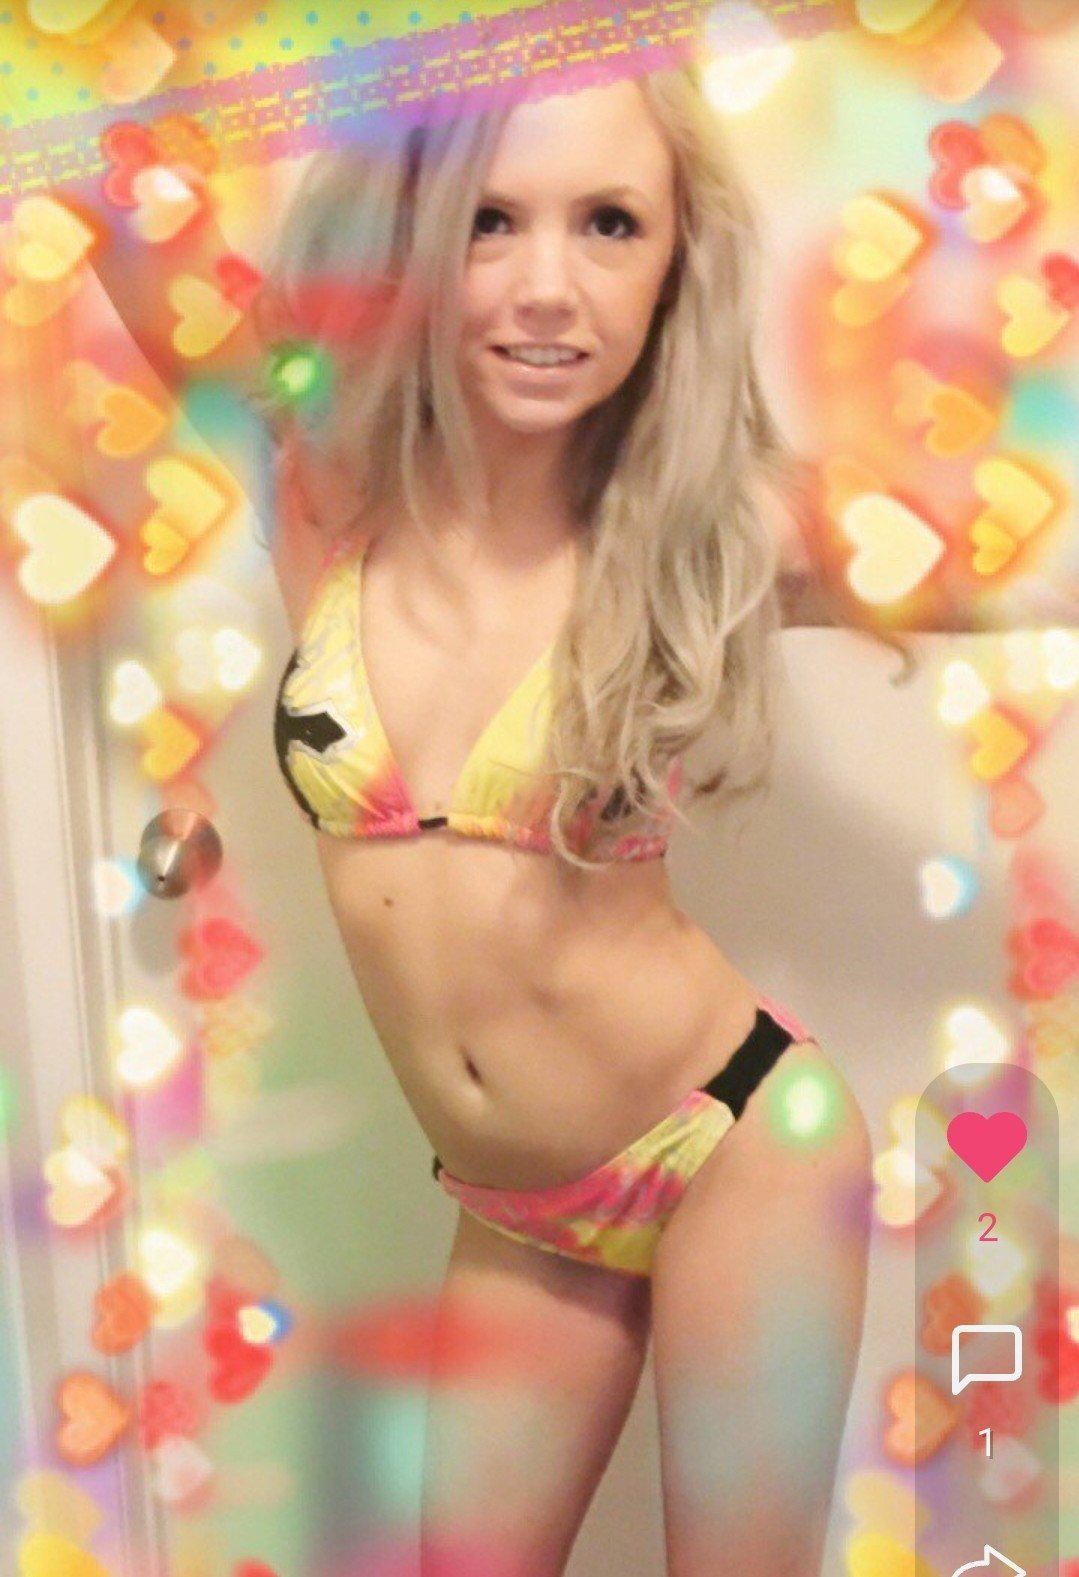 Watch the Photo by CamSharks & CSLive with the username @CamSharks, who is a brand user, posted on November 6, 2022. The post is about the topic XXX Webcam Shows. and the text says '@CamSharks Scorching HOT Star Model @SophiaSinclaireX is LIVE RIGHT NOW!

https://CamSharks.net/cam/SophiaSinclaireX (18+)

✓Free Signup • Cam2Cam✓

#webcam #livesex #liveporn #horny #sex #sexy #women #porn #sex #xxx #sexcam #naked #tits #bigtoys..'